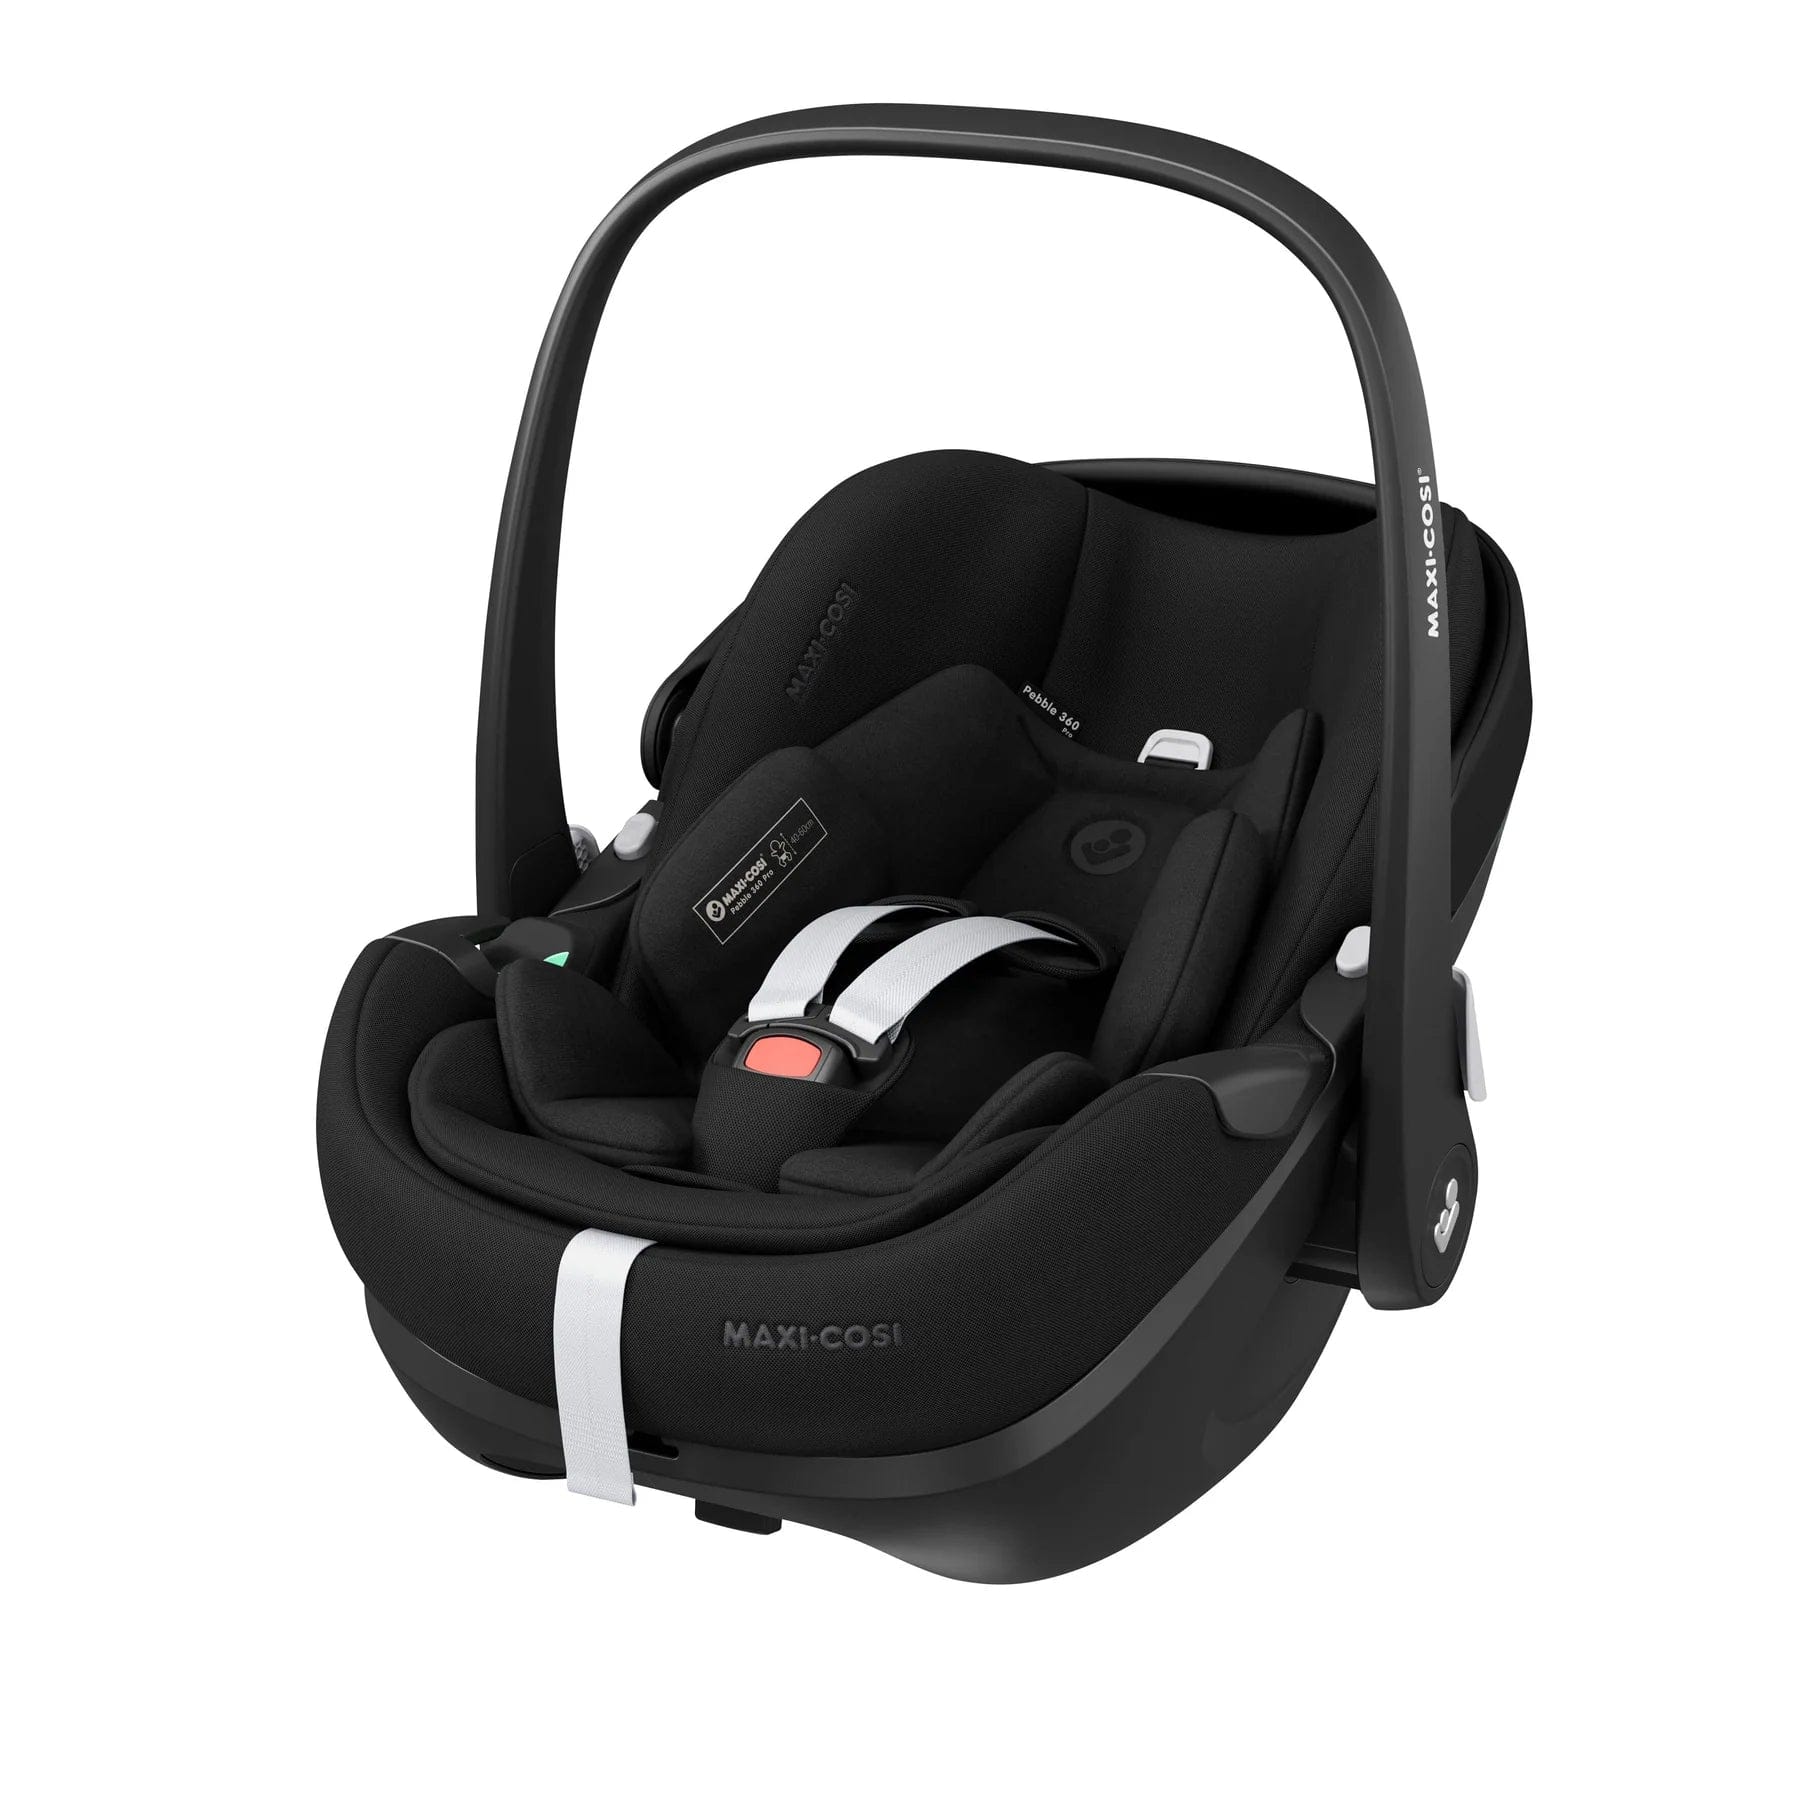 Uppababy travel systems UPPAbaby Vista V2 Pebble 360 PRO & Base Travel System Bundle Lucy 14128-LUC